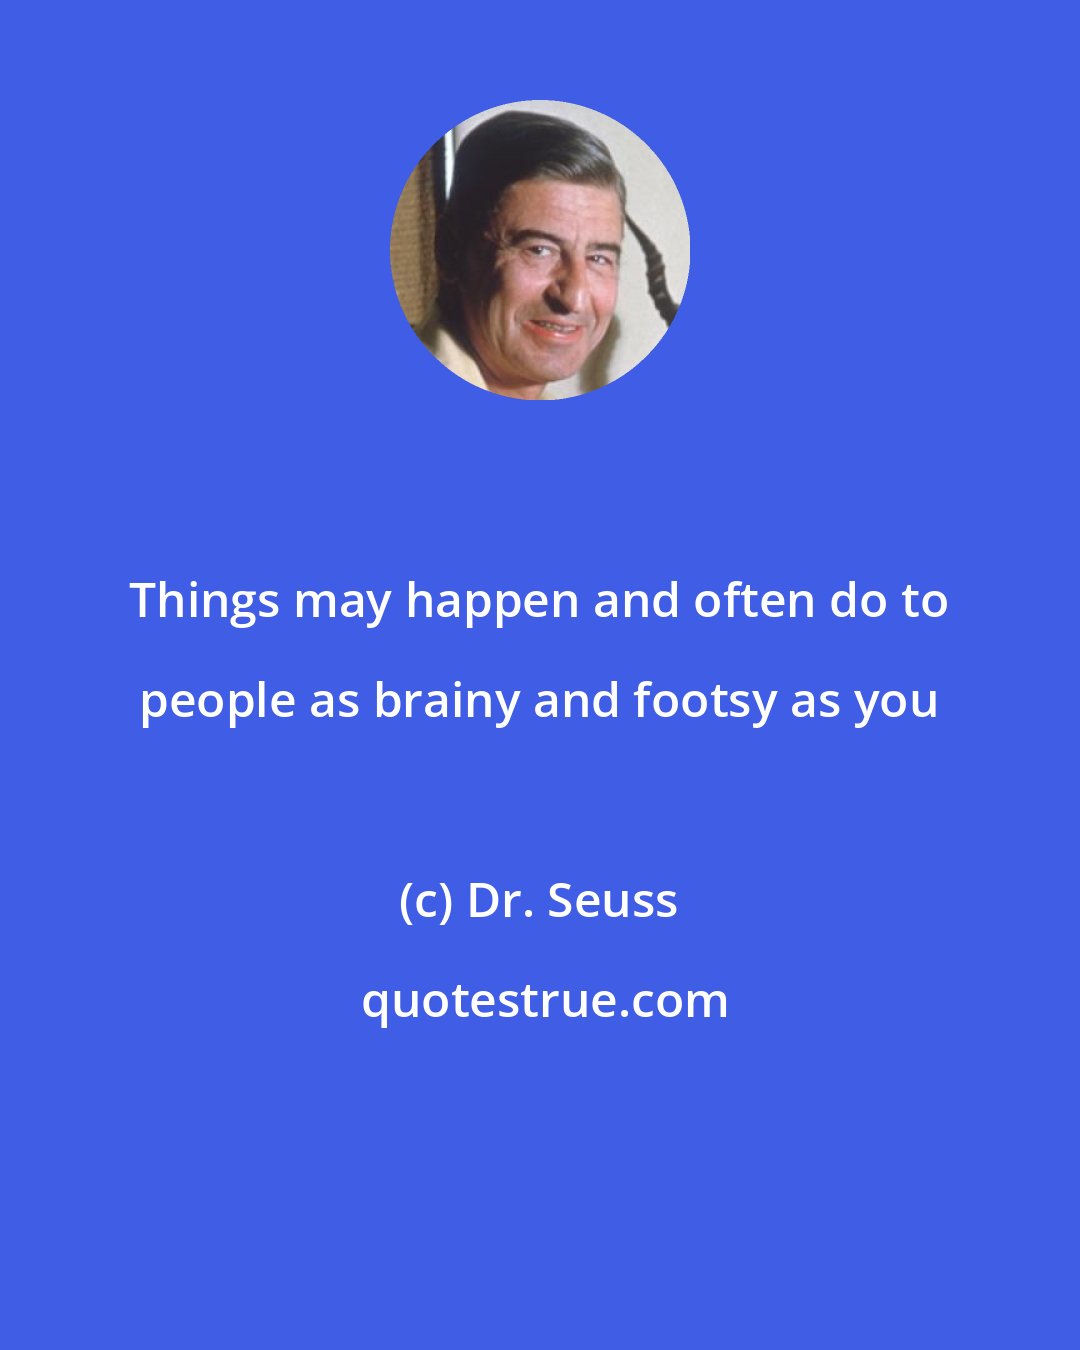 Dr. Seuss: Things may happen and often do to people as brainy and footsy as you